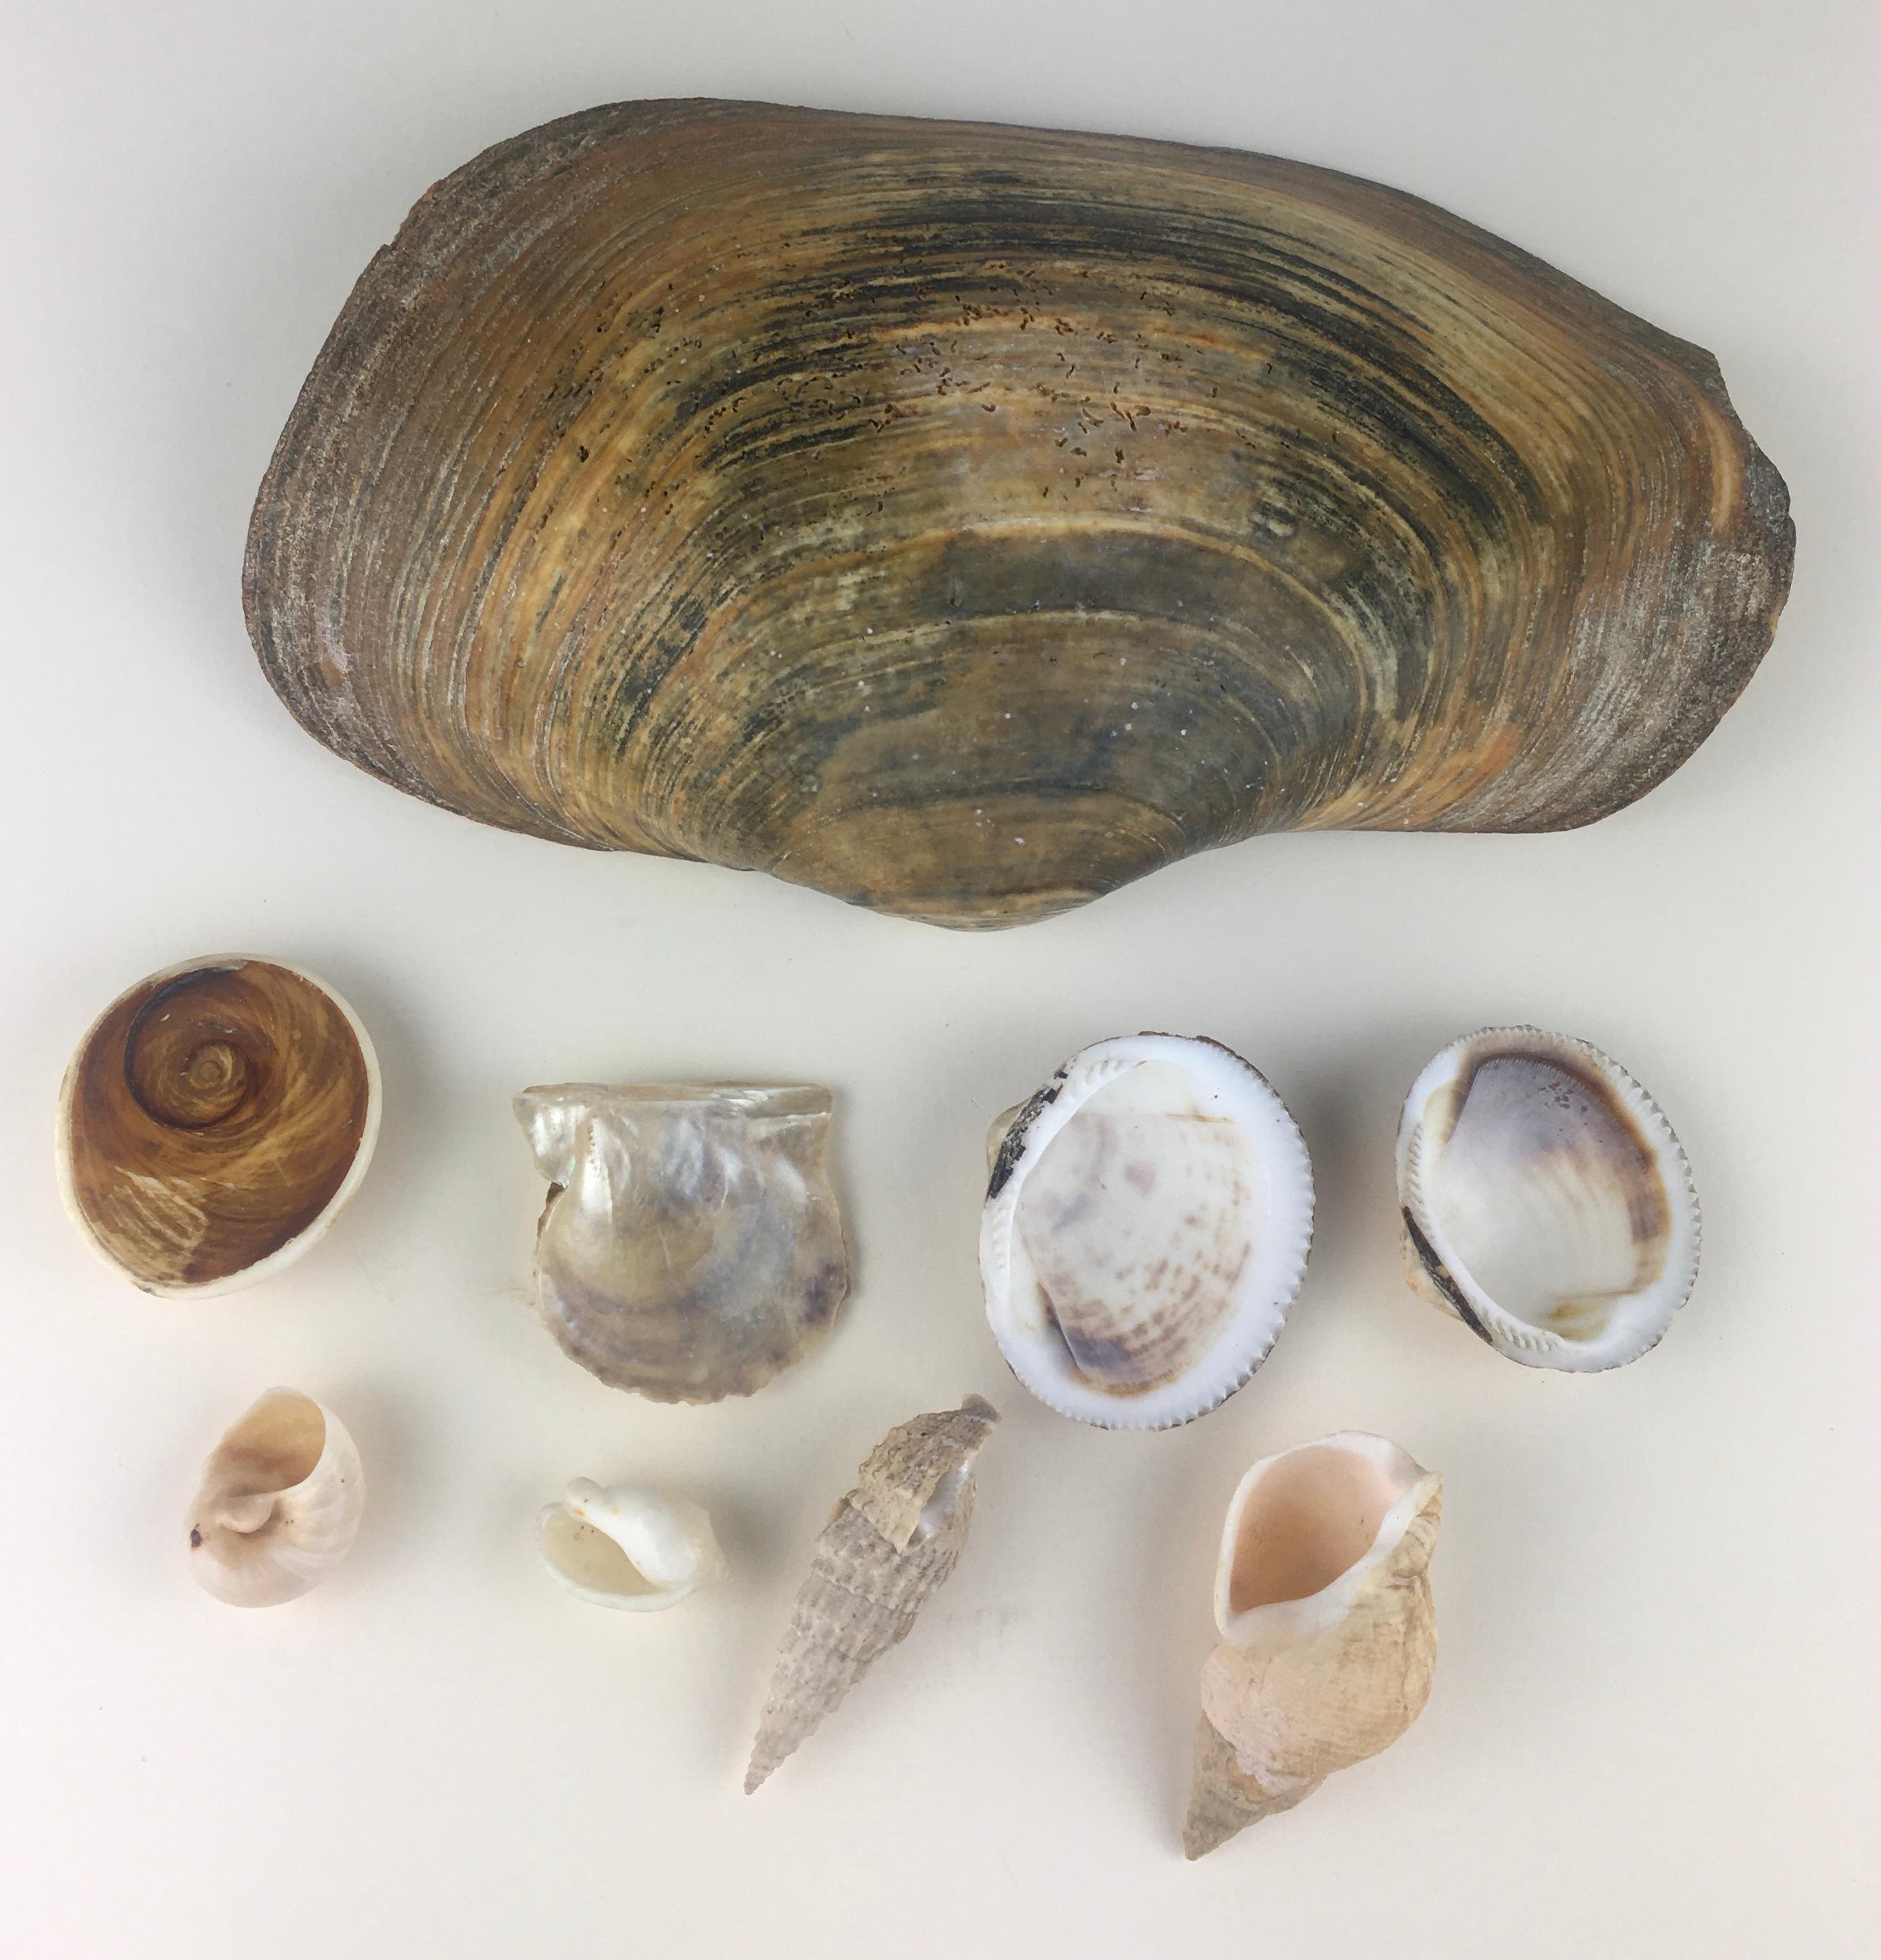 Beautiful collection of 9 seashells with various shapes and textures. 

Large seashell measures: 9 1/4